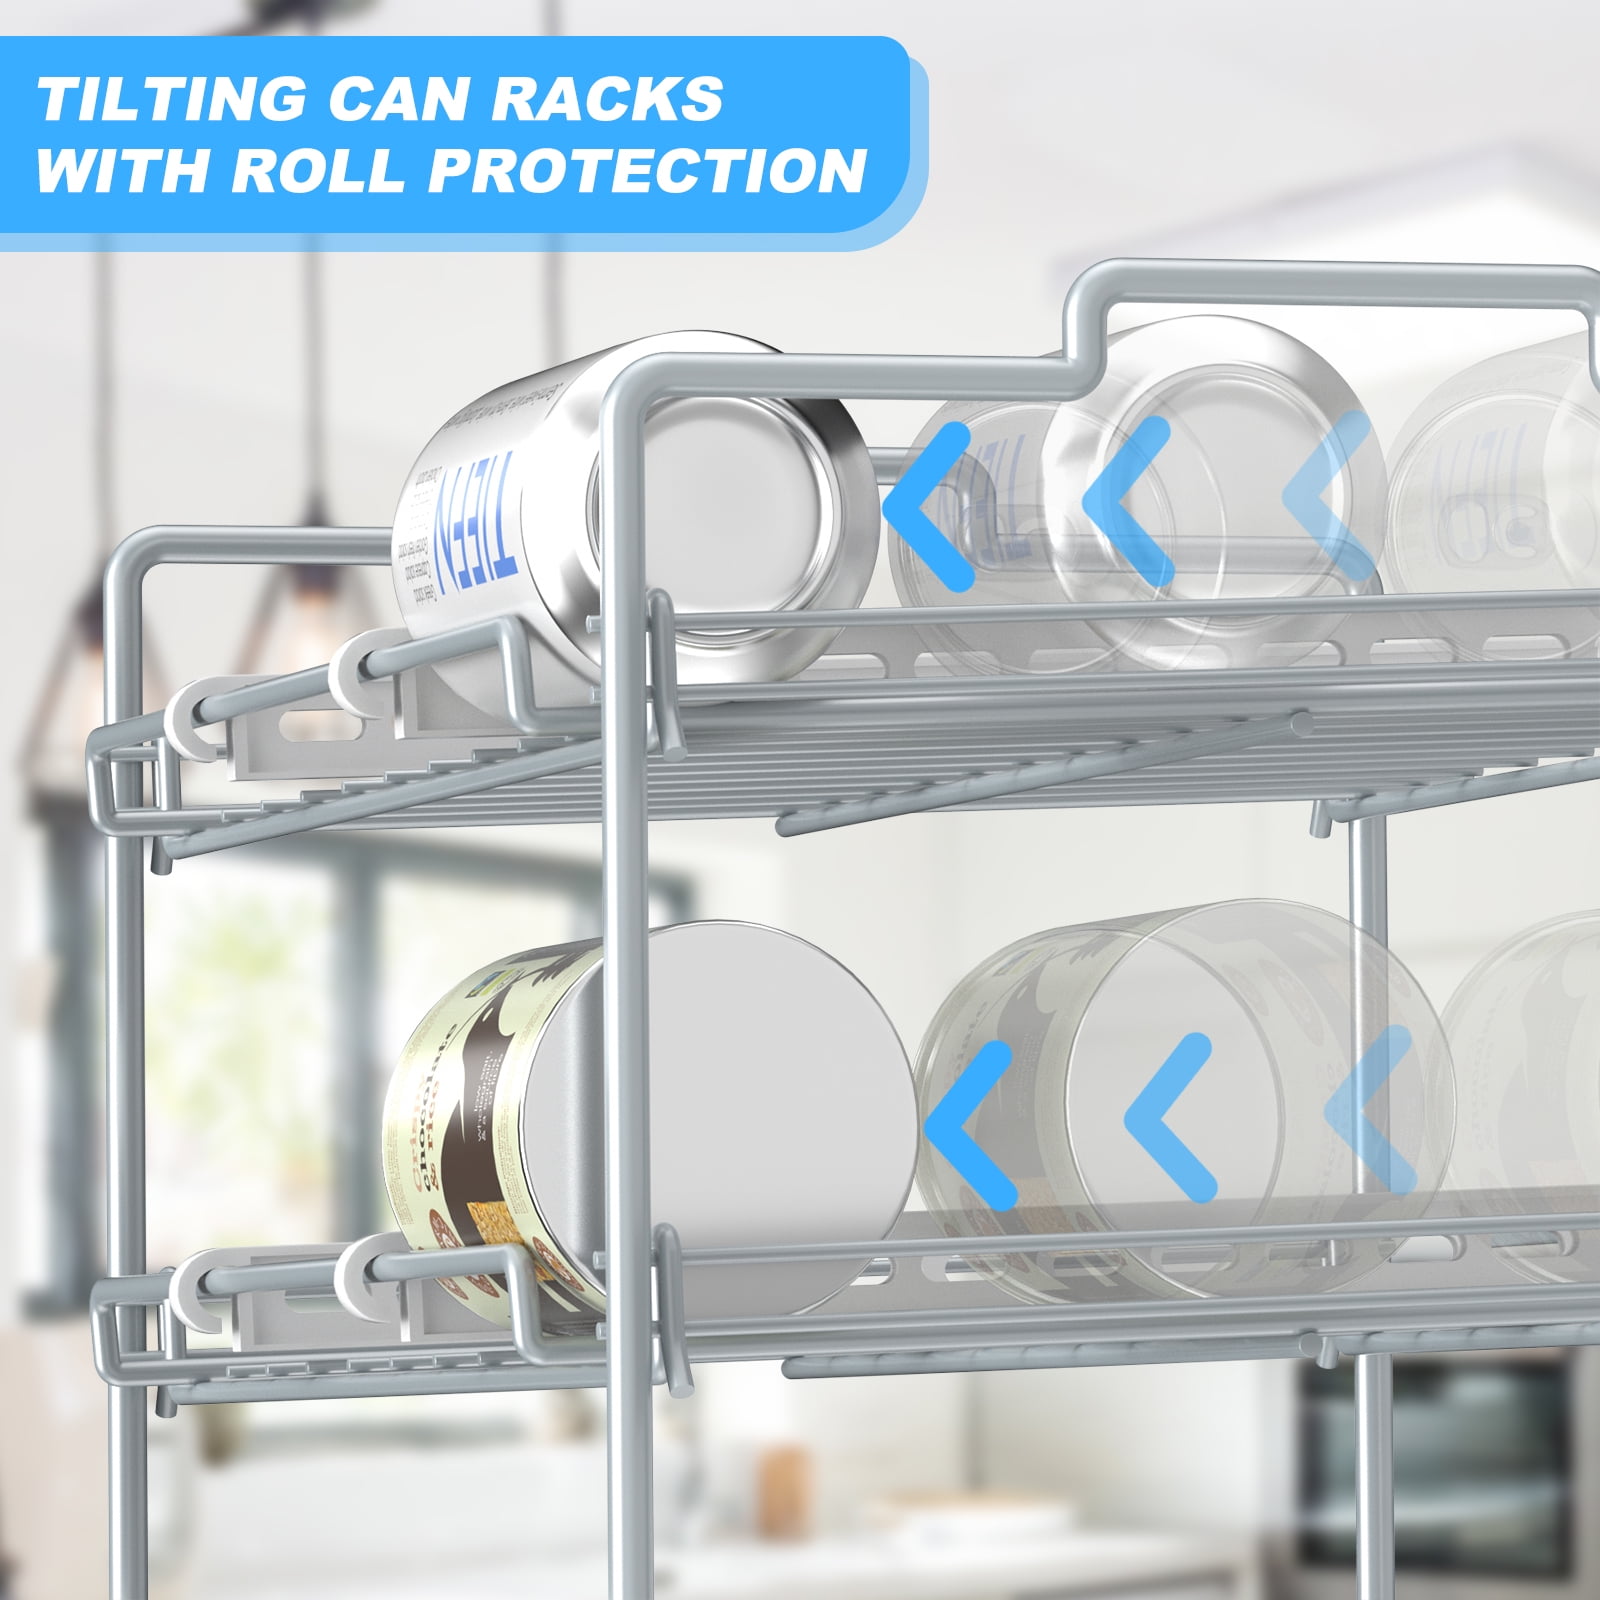 Sulishang 4 Tiers Stackable Can Rack Organizer, Wear-resistant Upgrade Beverage Food Can Dispenser Holder Holds Up to 48 Cans for Kitchen Cabinet and